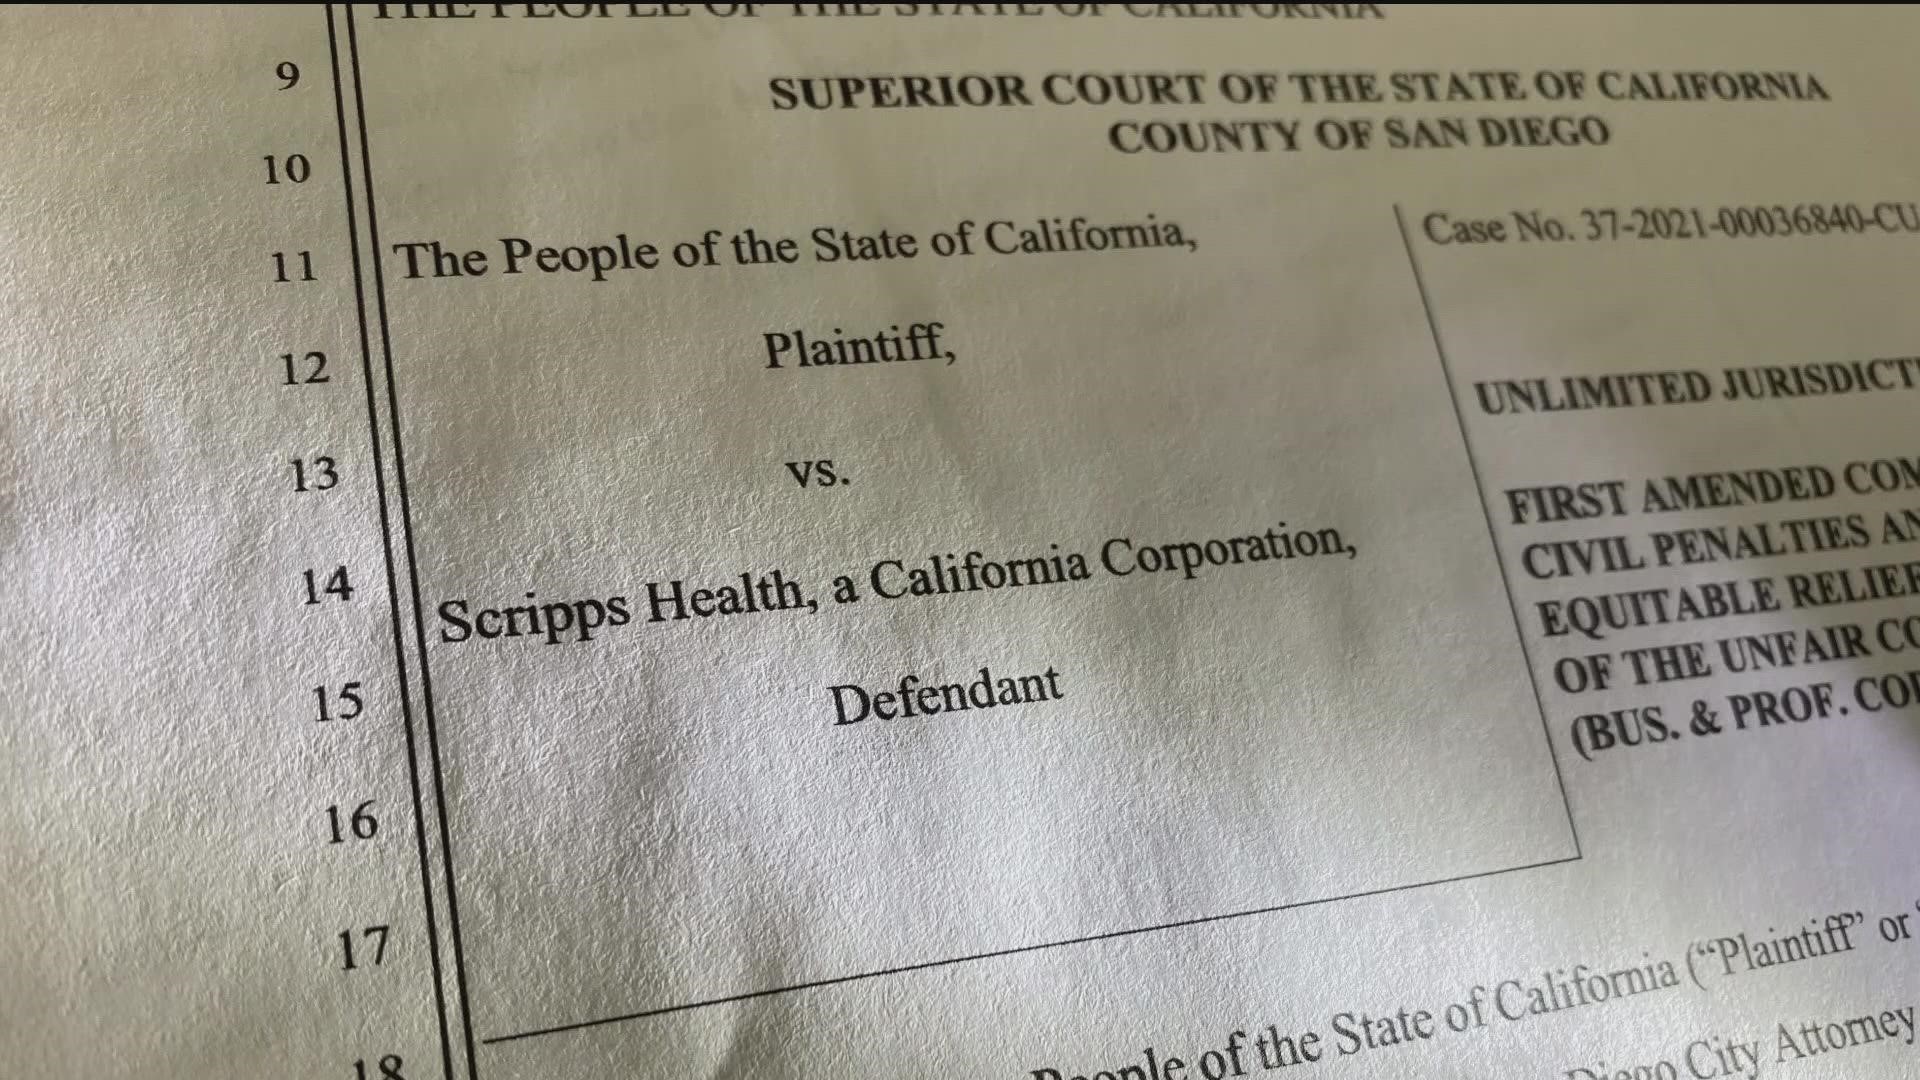 The suit alleges a mentally ill patient was illegally discharged to an unsupervised group home.